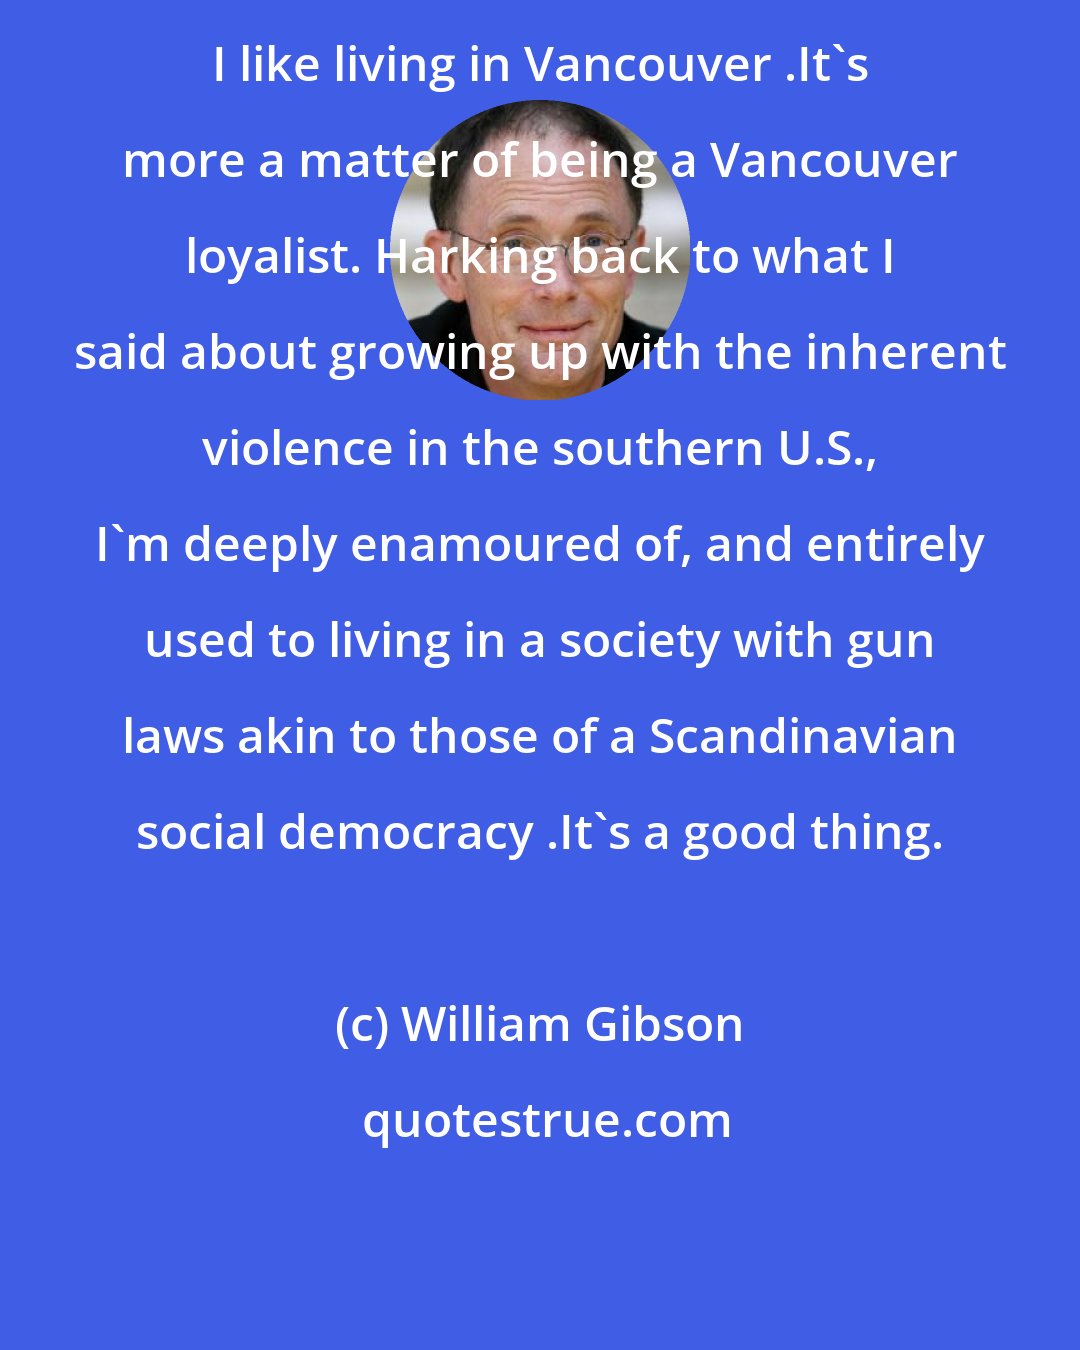 William Gibson: I like living in Vancouver .It's more a matter of being a Vancouver loyalist. Harking back to what I said about growing up with the inherent violence in the southern U.S., I'm deeply enamoured of, and entirely used to living in a society with gun laws akin to those of a Scandinavian social democracy .It's a good thing.